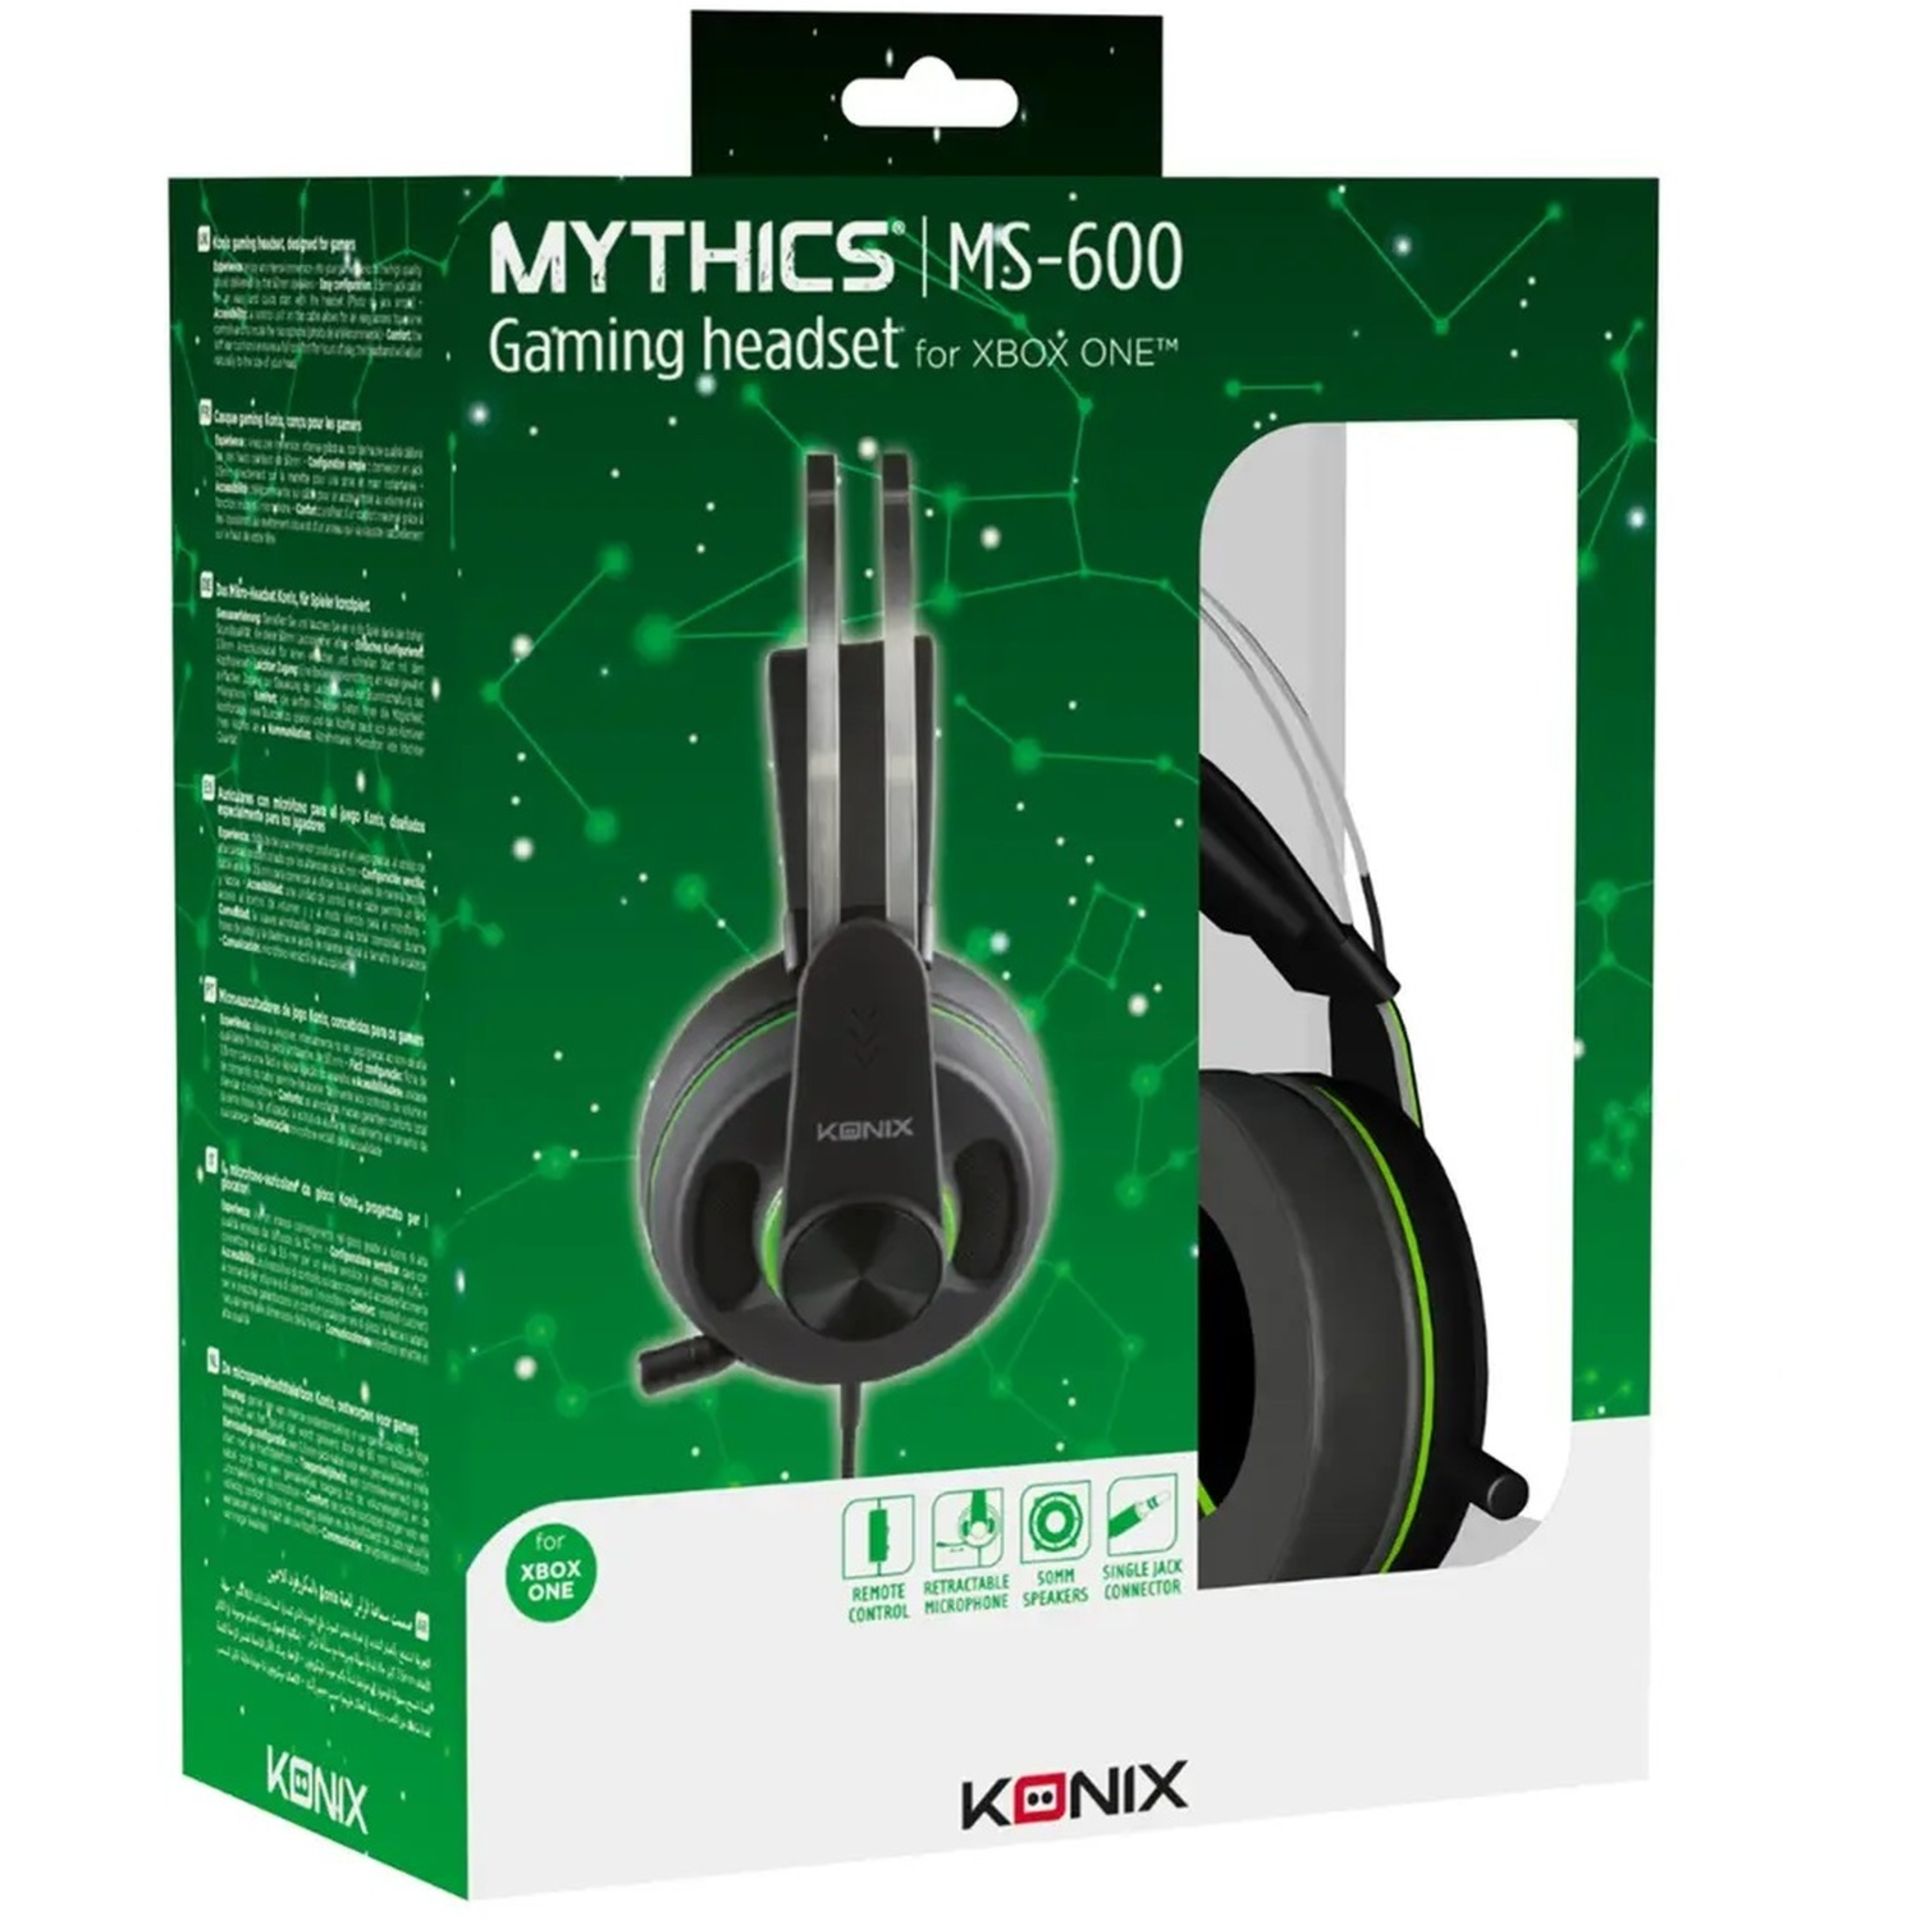 6x BRAND NEW KONIX MYTHICS MS-600 GAMING HEADSETS FOR XBOX. (R15-10)